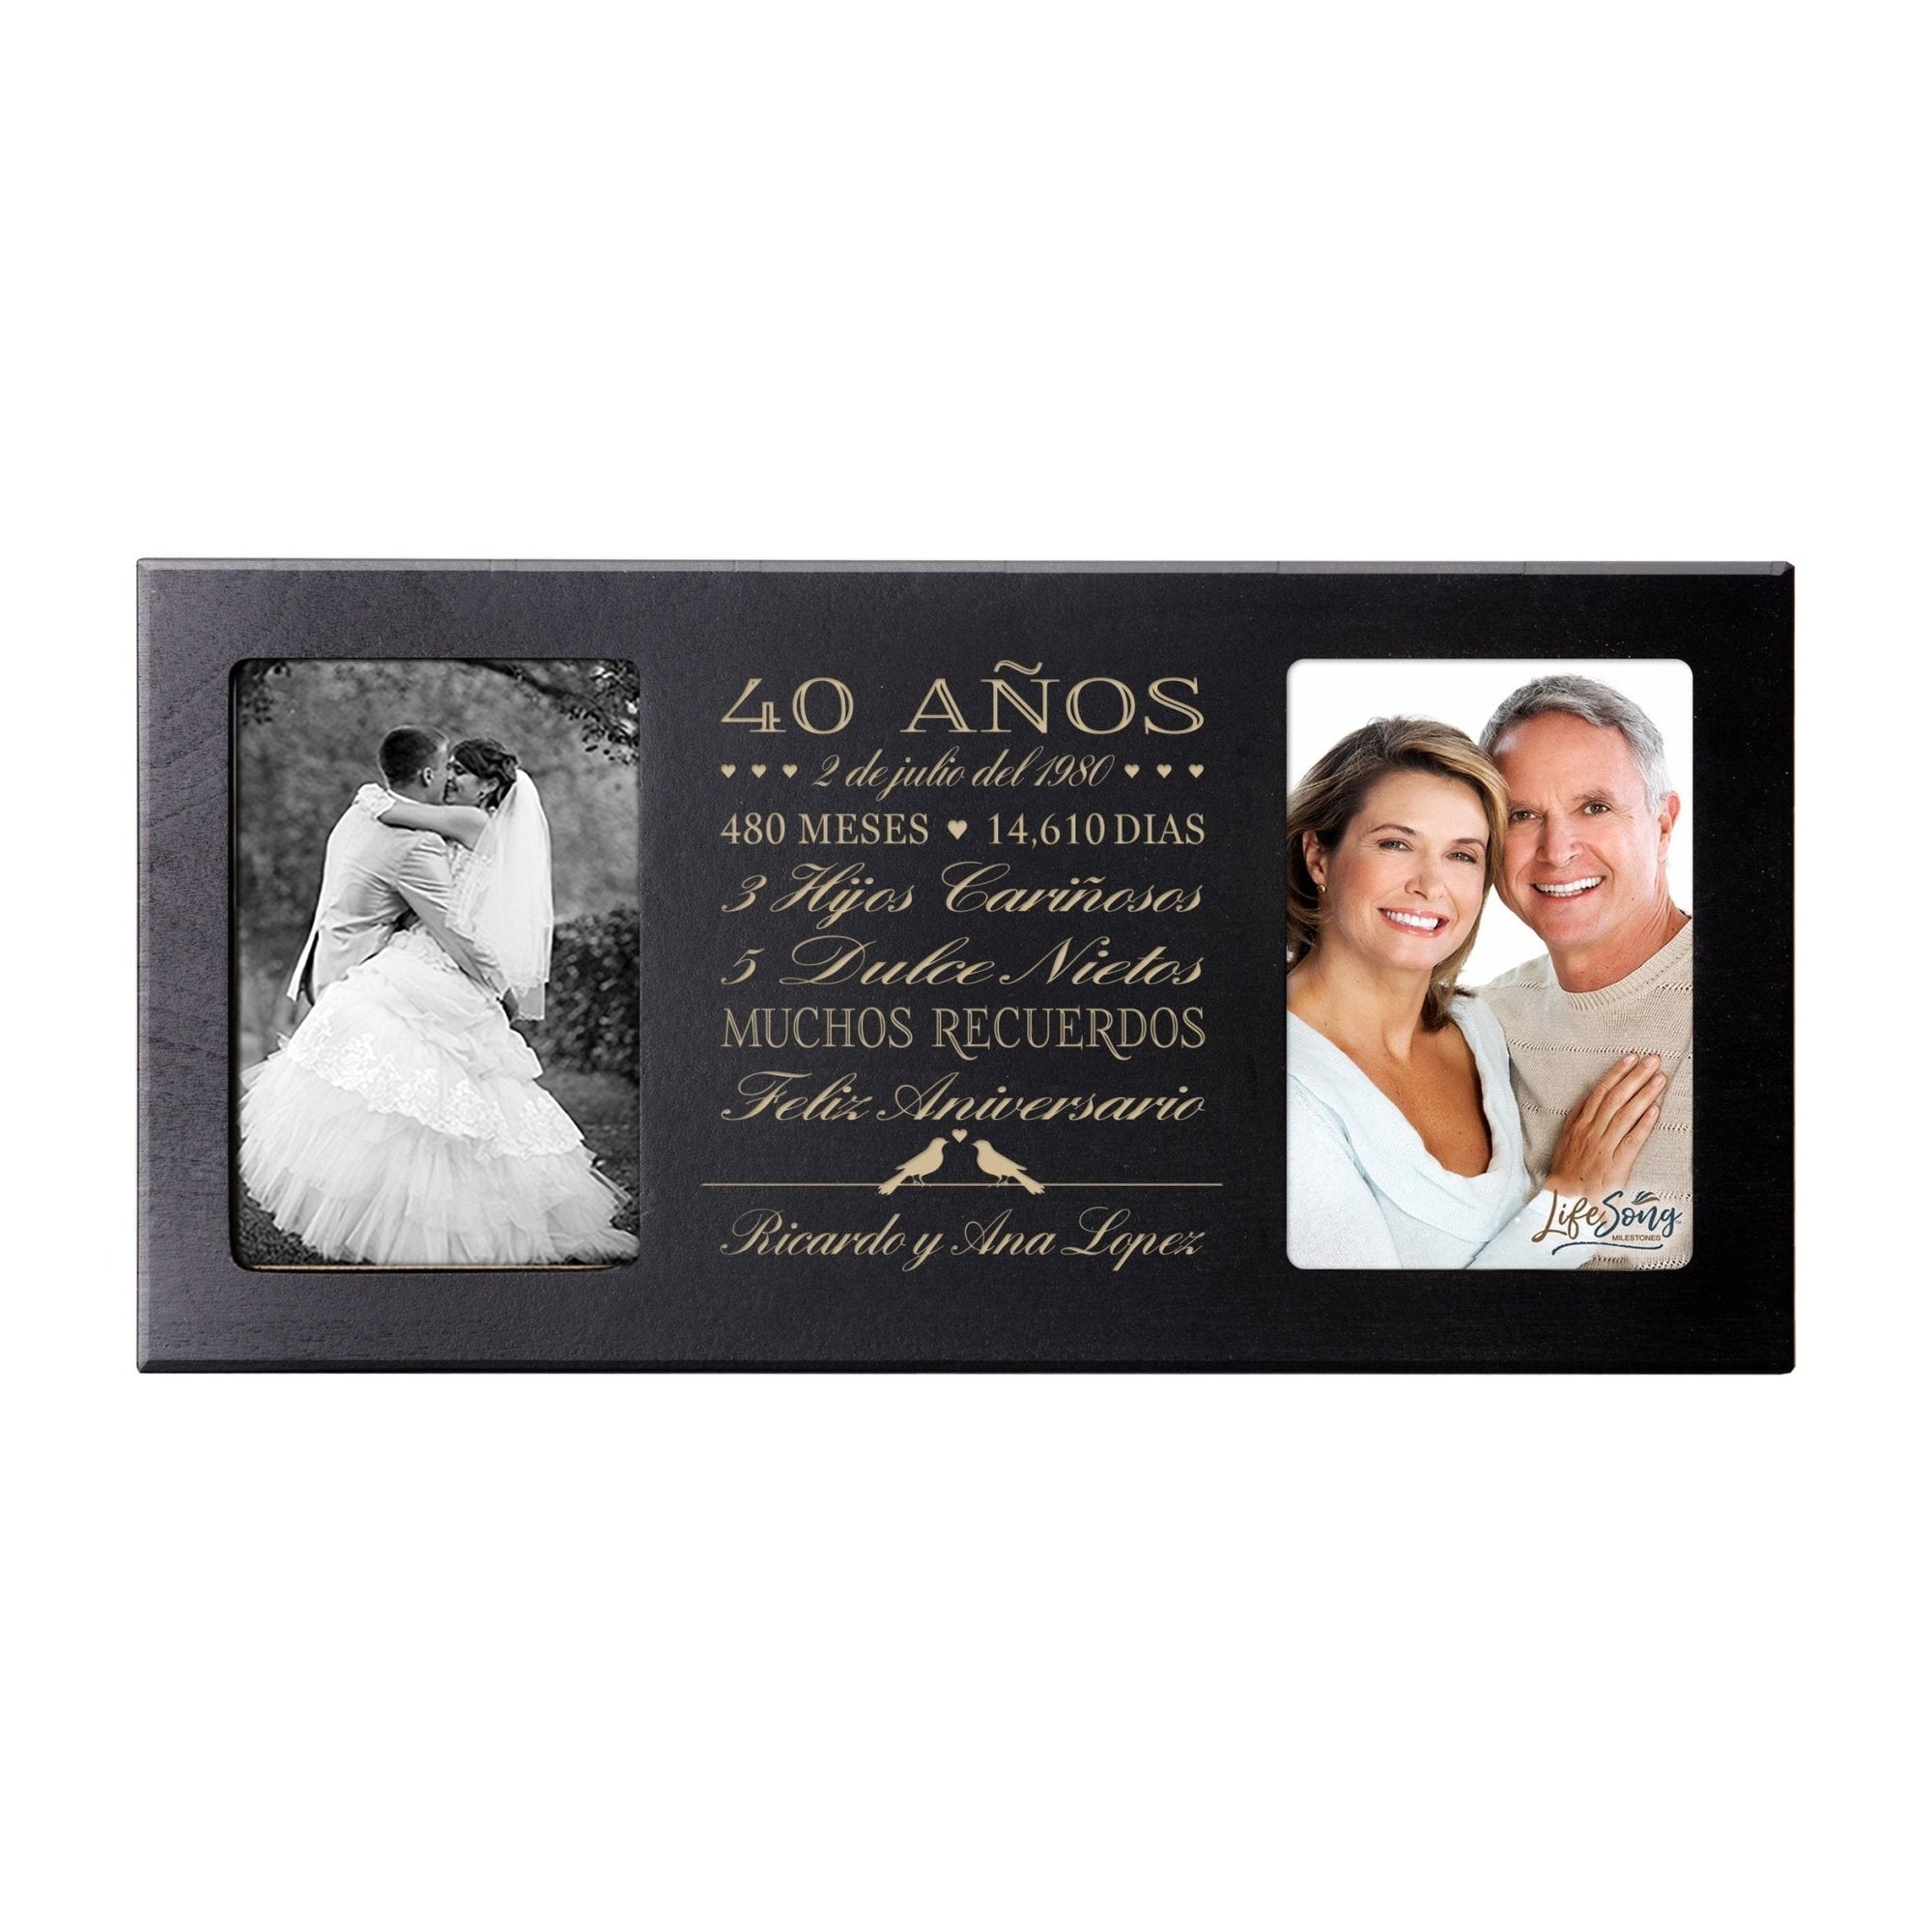 Personalized 40th Anniversary Picture Frame Holds 2-4x6 Photos (Spanish Verse) - LifeSong Milestones